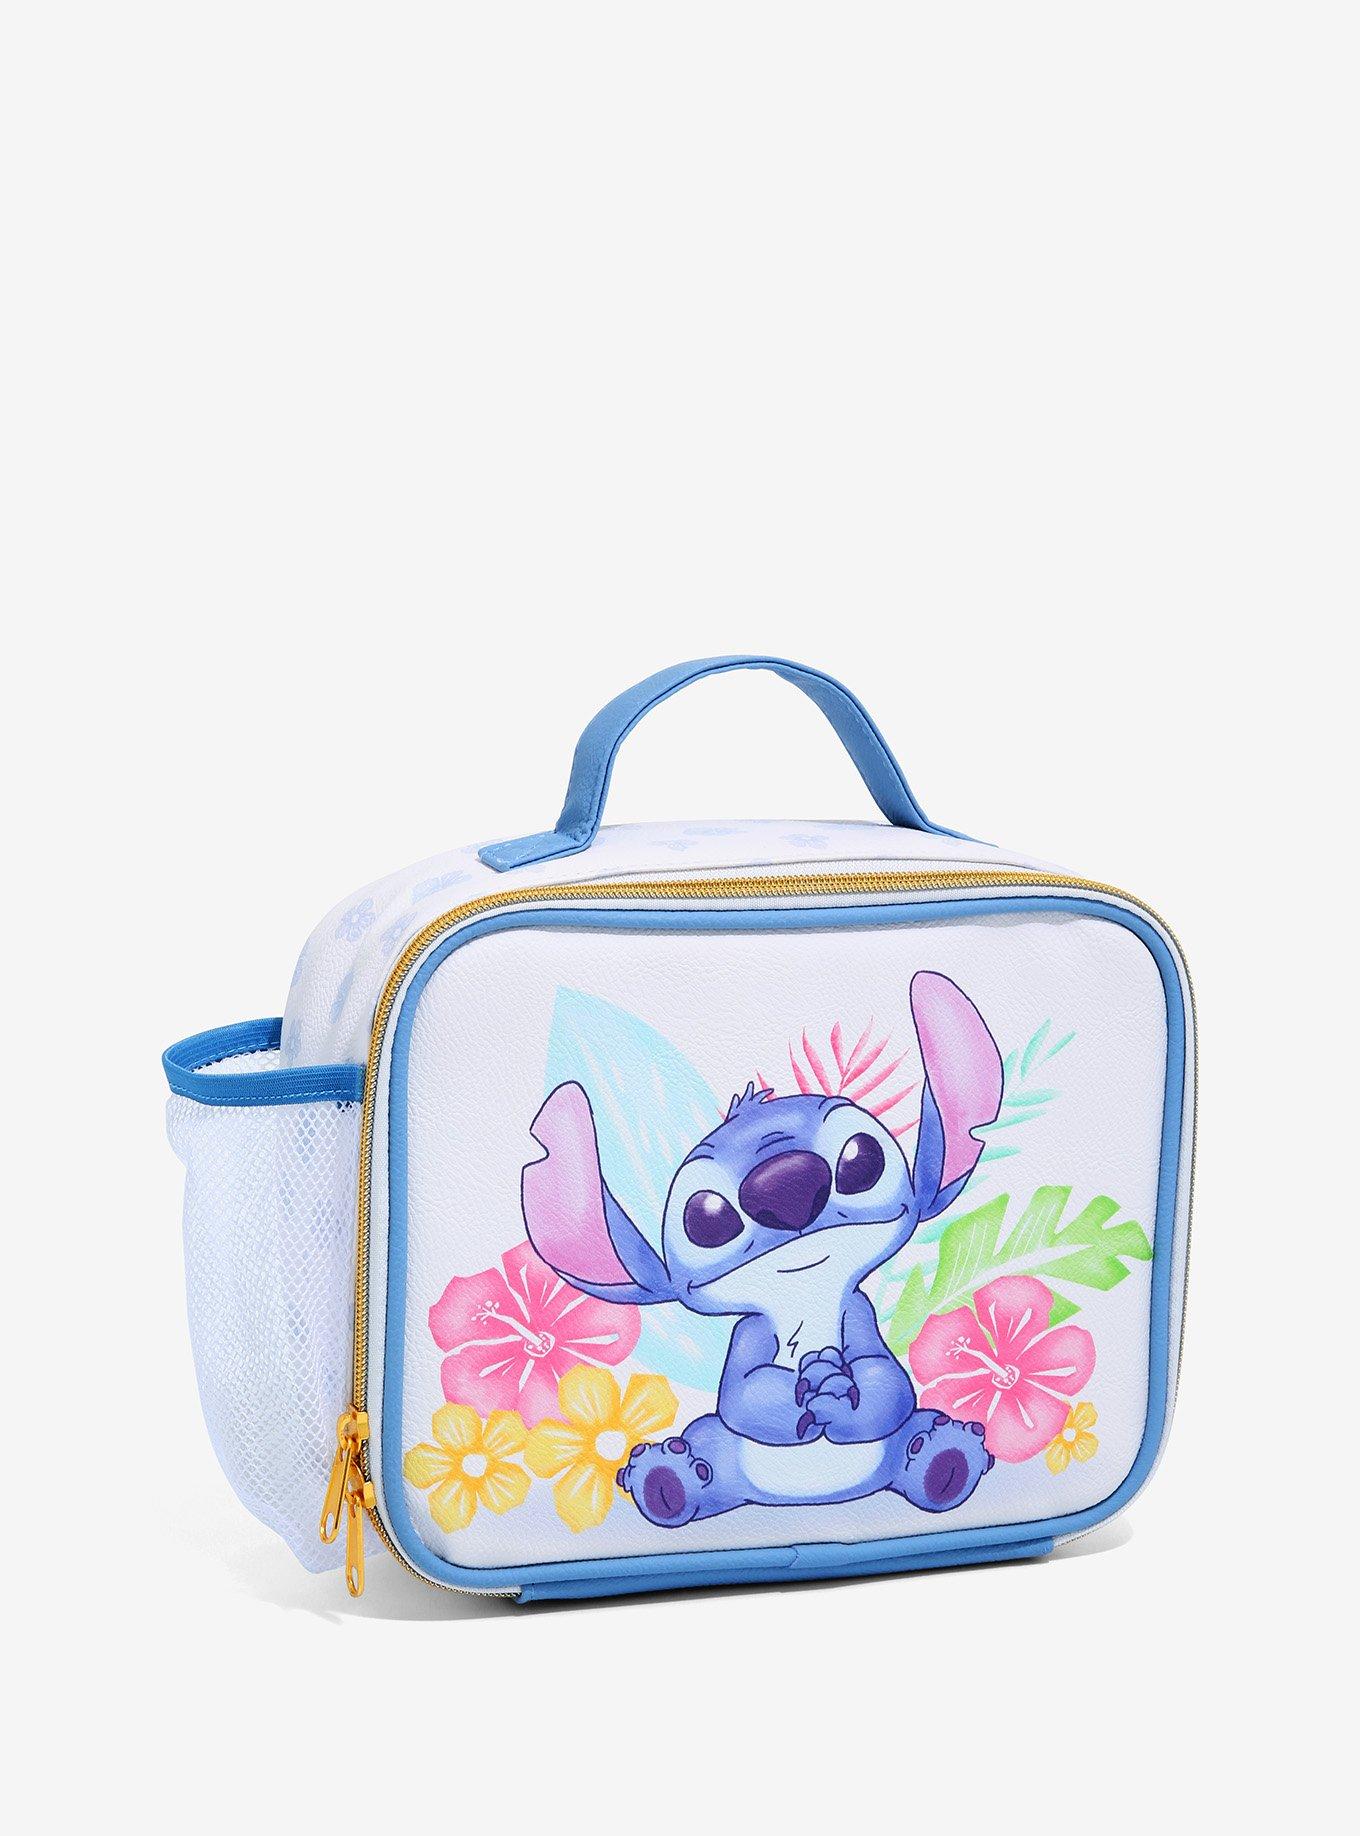 Stitch Lunch Box for Women Insulated Lunch Box Adult Lunch Box Lunch Bag